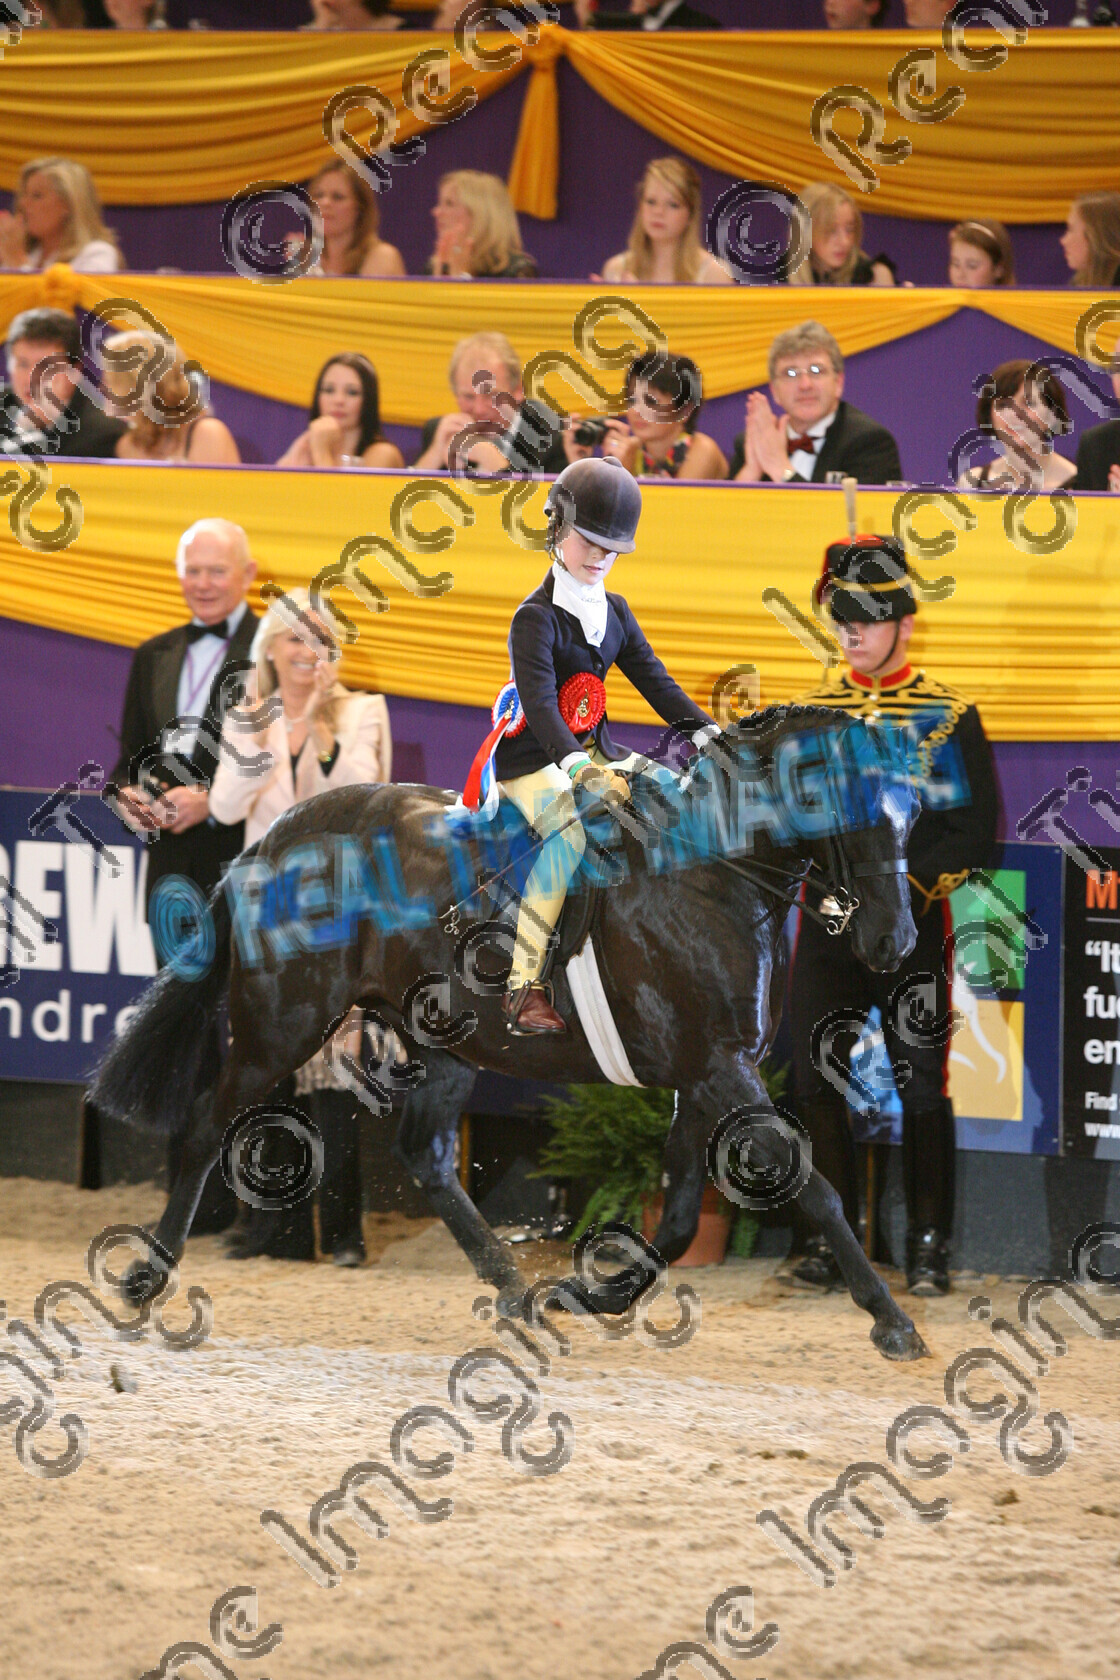 S09-69-13-059 
 Keywords: HOYS Horse Of The Year Show NEC LG Arena Birmingham UK Saturday 10 October 2009 indoors 1372 GREYLANDS MAID IN THE DARK black mare 122cm SHP Show Hunter Pony Champion Owner: Mrs D L Thomas Rider: Katie Roberts Supreme Pony Champion